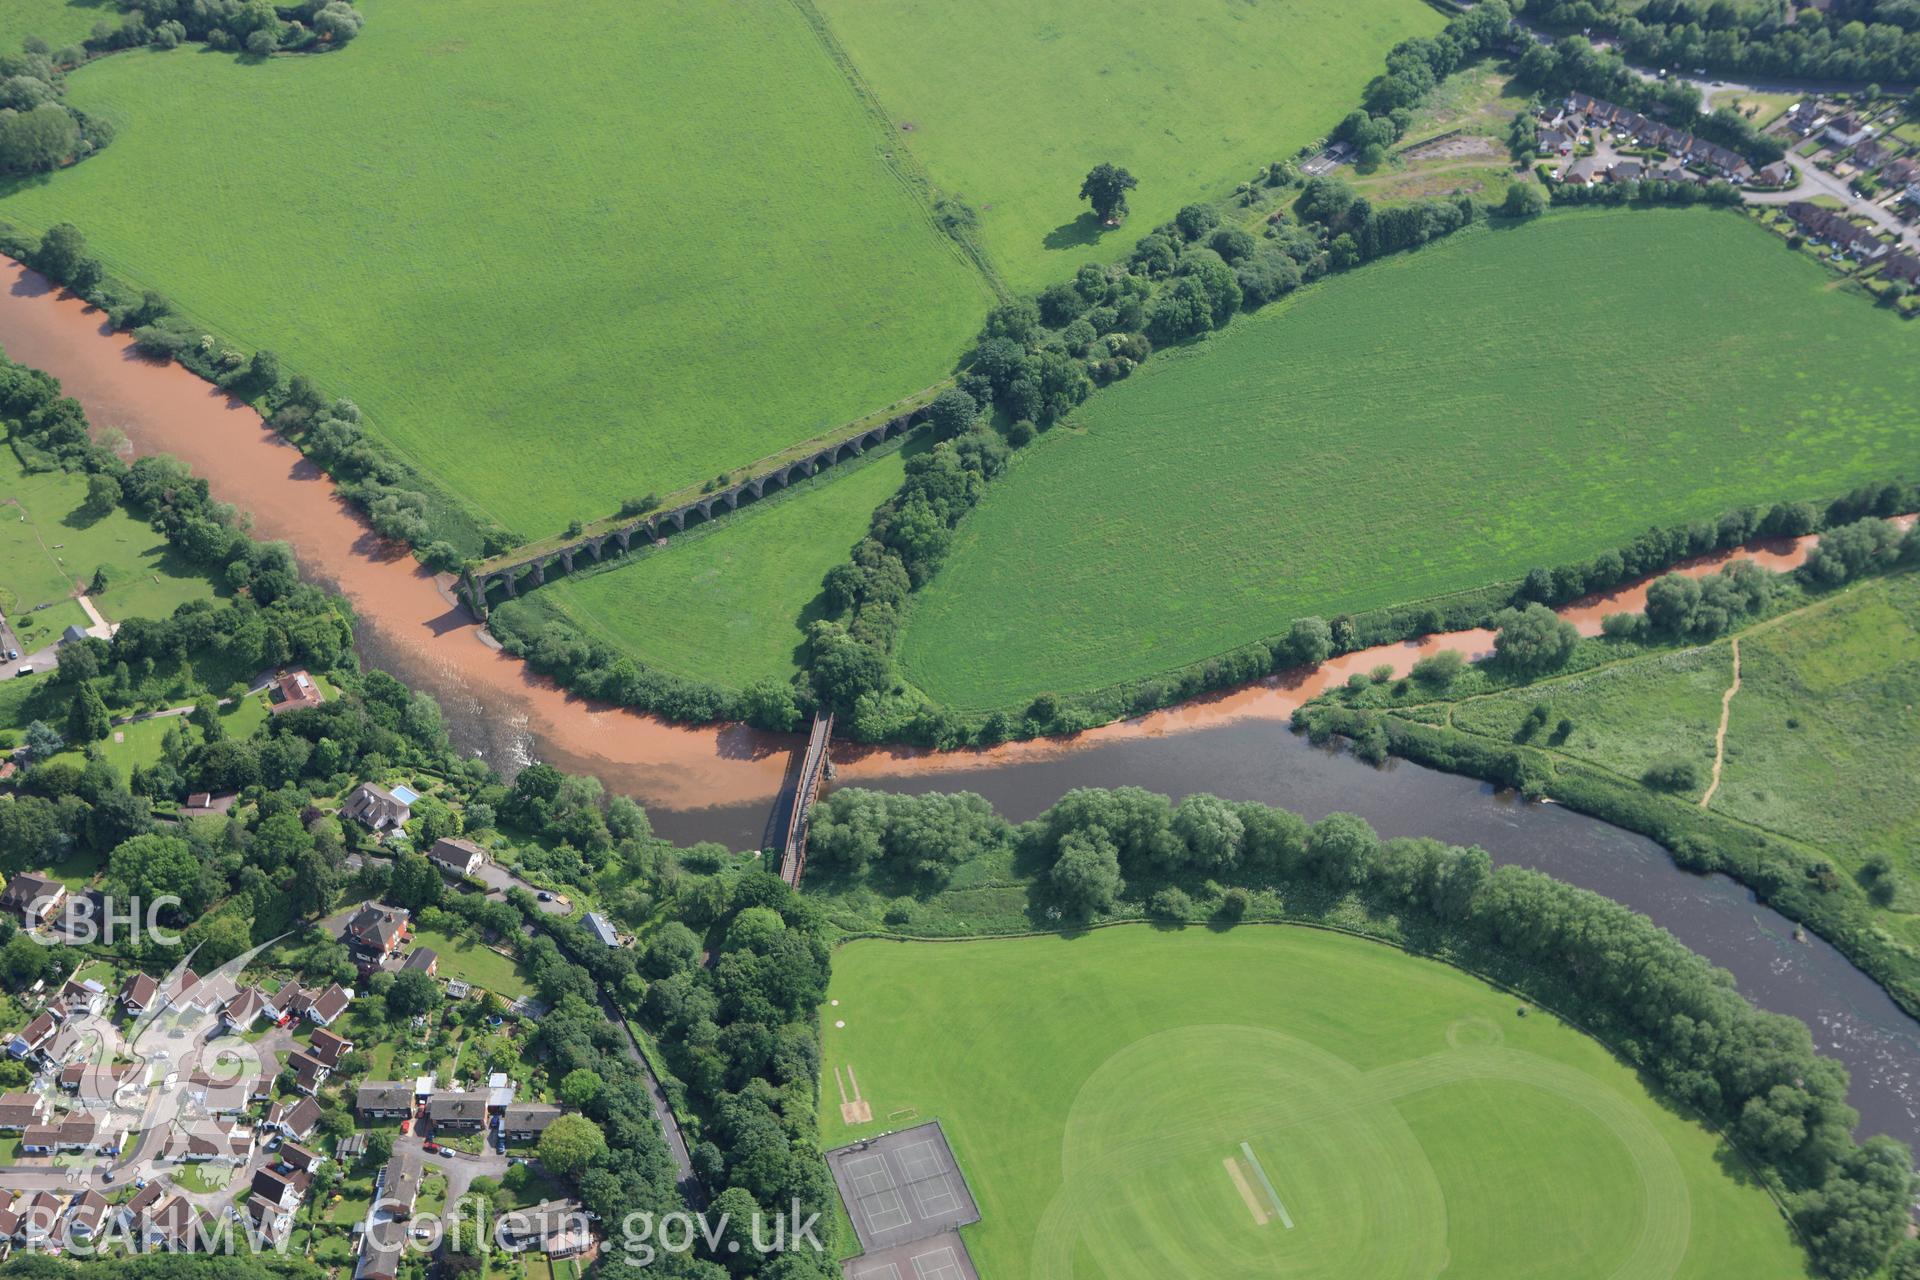 RCAHMW colour oblique aerial photograph of river patterns close to the Wye Bridge on the Hereford, Ross and Gloucester Railway in Monmouth. Taken on 11 June 2009 by Toby Driver